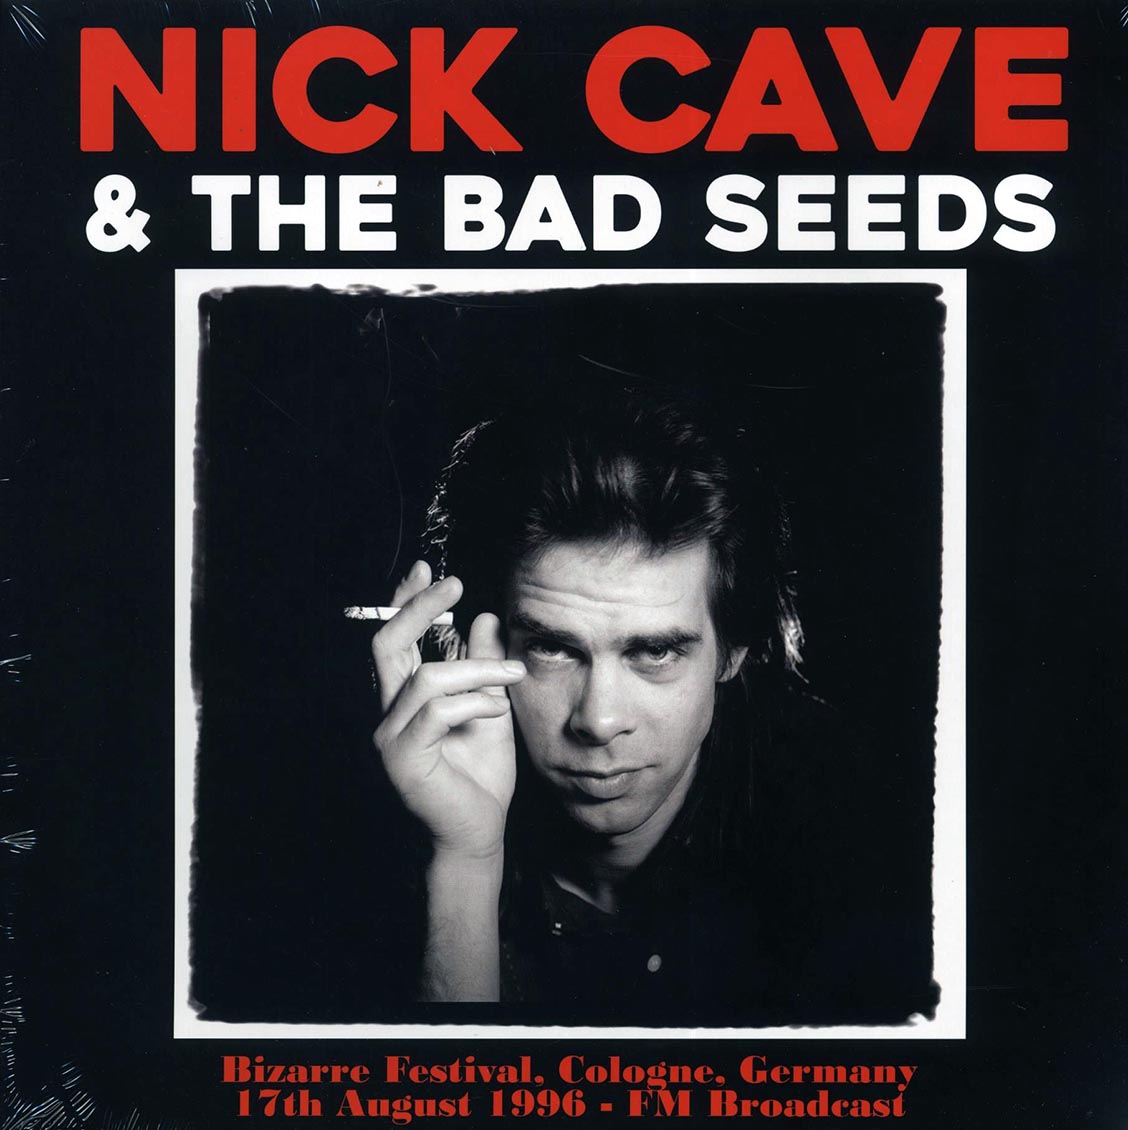 Nick Cave & The Bad Seeds - Bizarre Festival, Cologne, Germany, 17th August 1996: FM Broadcast (ltd. 500 copies made) - Vinyl LP